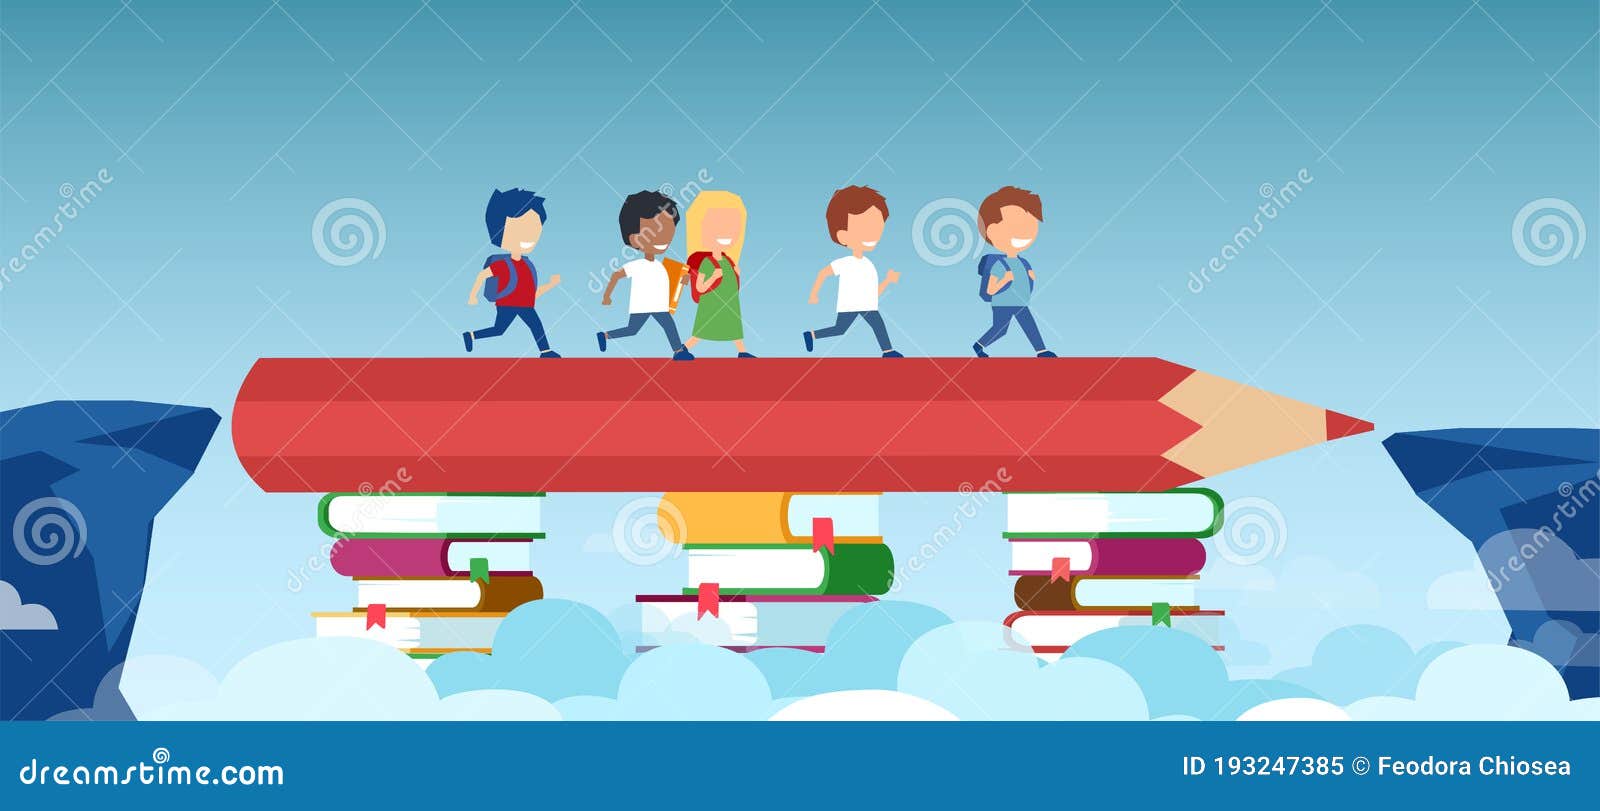  of a pencil on book stacks bridging the gap in education for children passing by